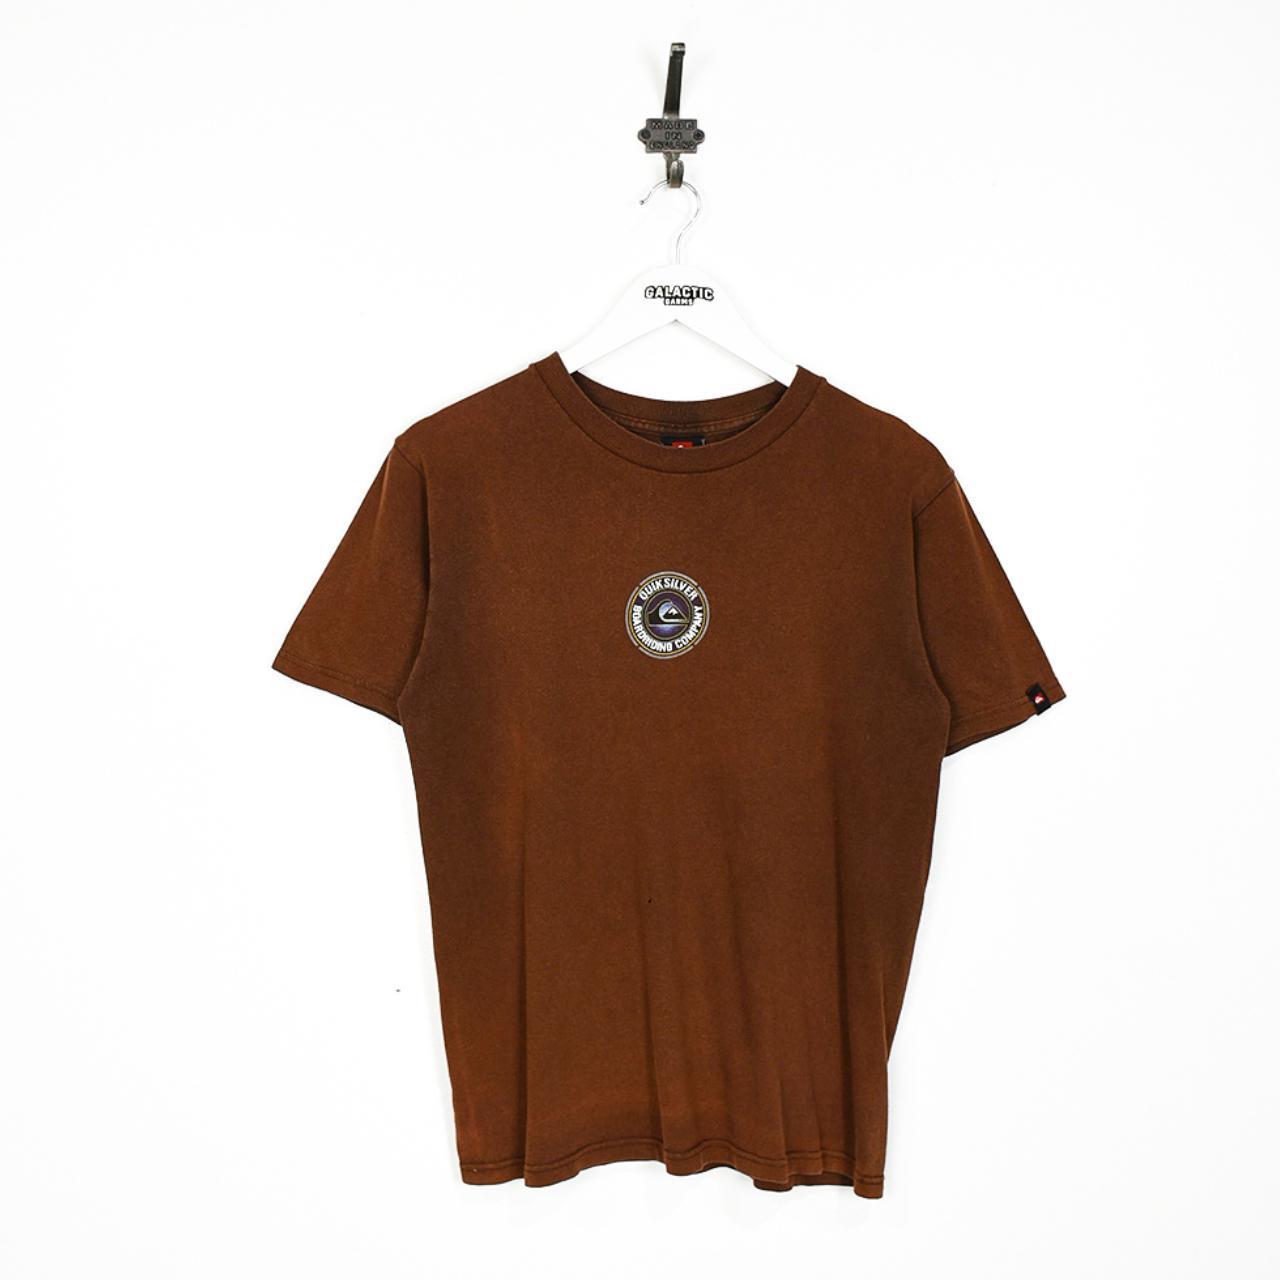 Product Image 2 - Quiksilver T-Shirt 

Condition: Very Good

Size